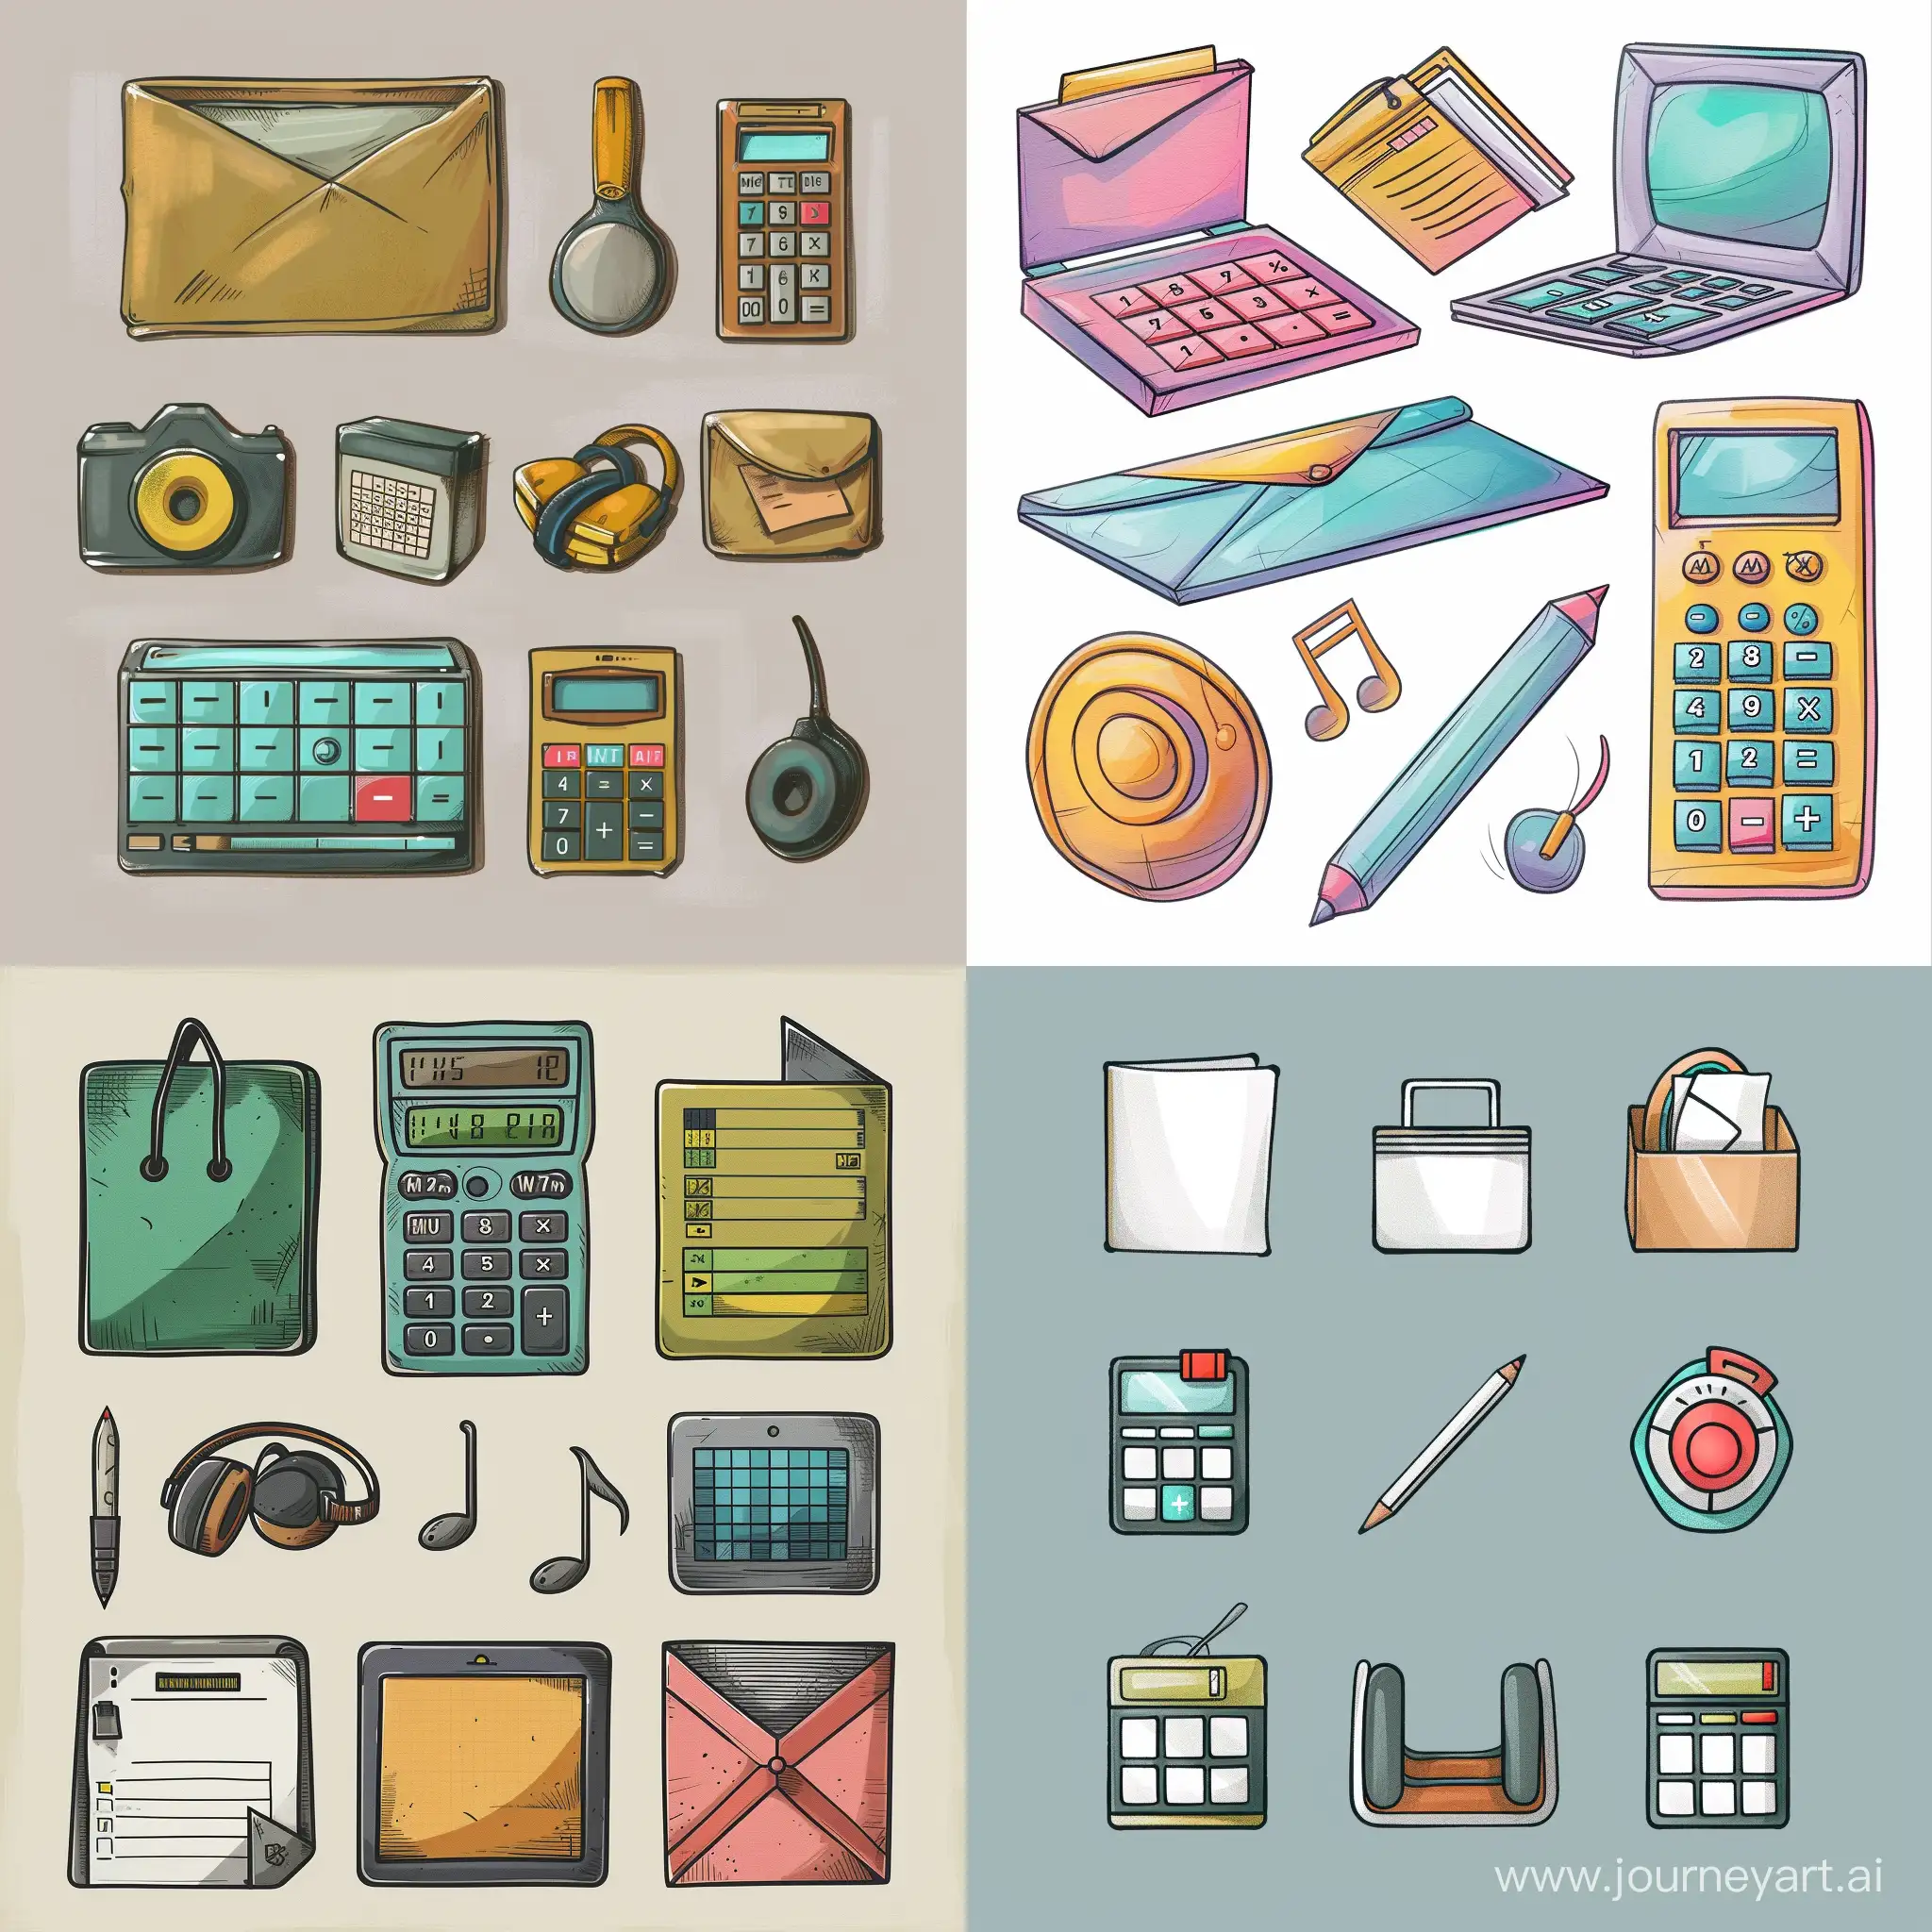 Draw folder, music player, calculator, notepad icons in Borderland-like style